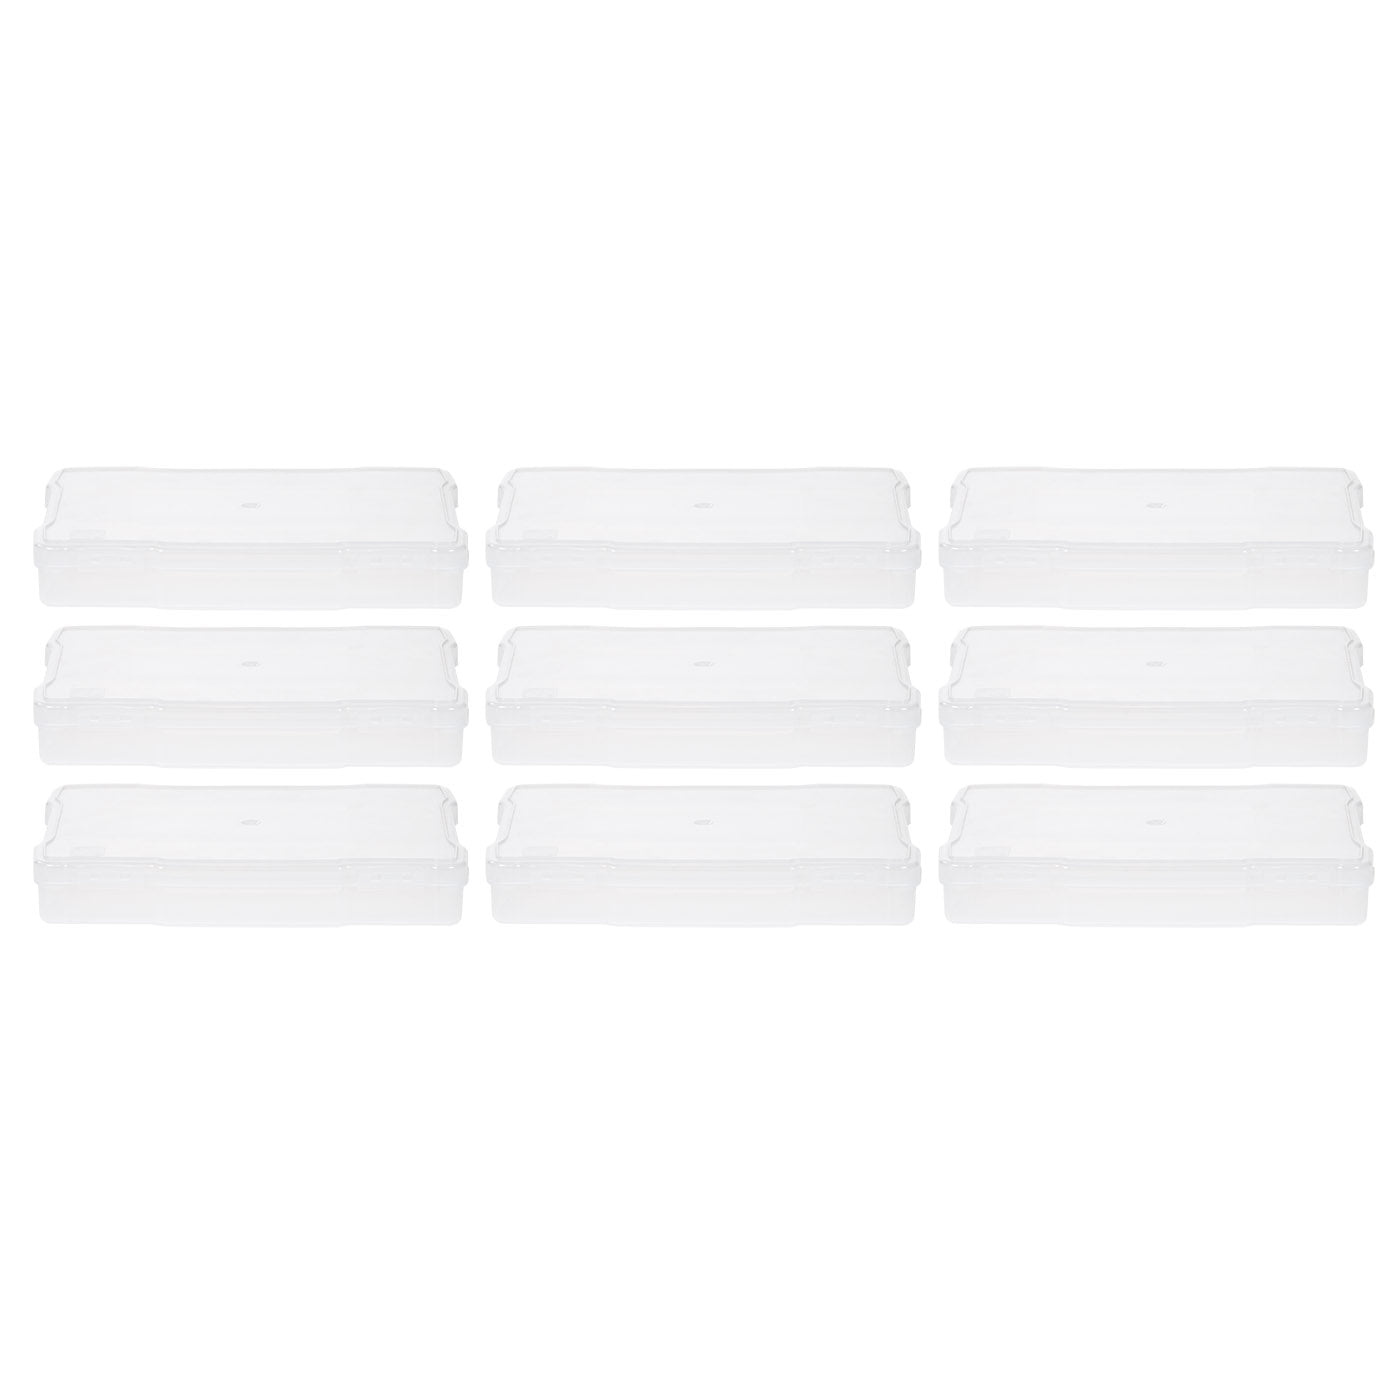 Naivees 12 Pack Photo Case 5 x 7 Photo Storage Boxes Inner Photo Organizer Boxes Clear Plastic Picture Boxes Transparent Craft Keeper Photo Contain